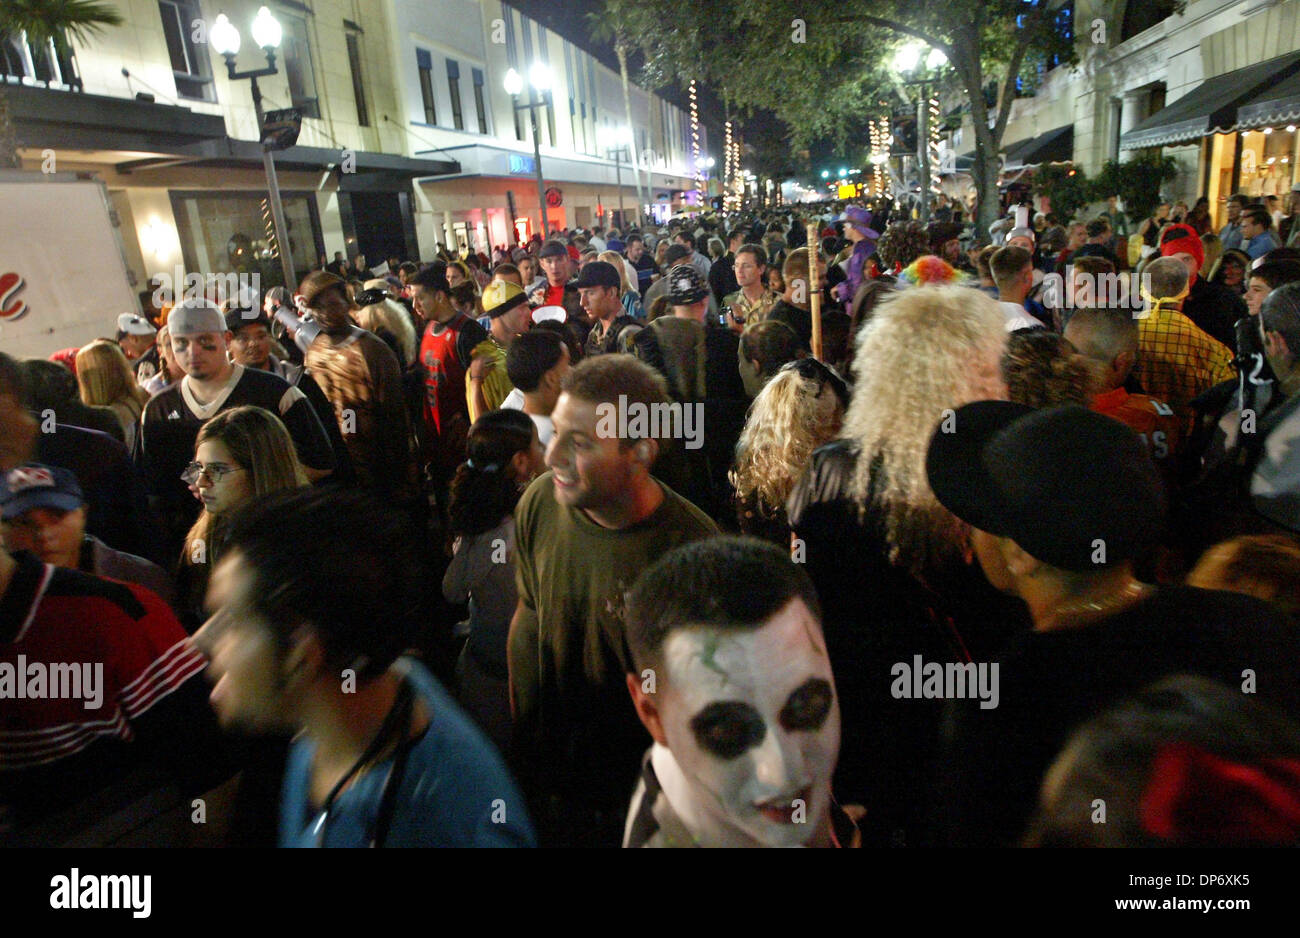 Oct 28, 2006; West Palm Beach, FL, USA; People celebrate dressed in